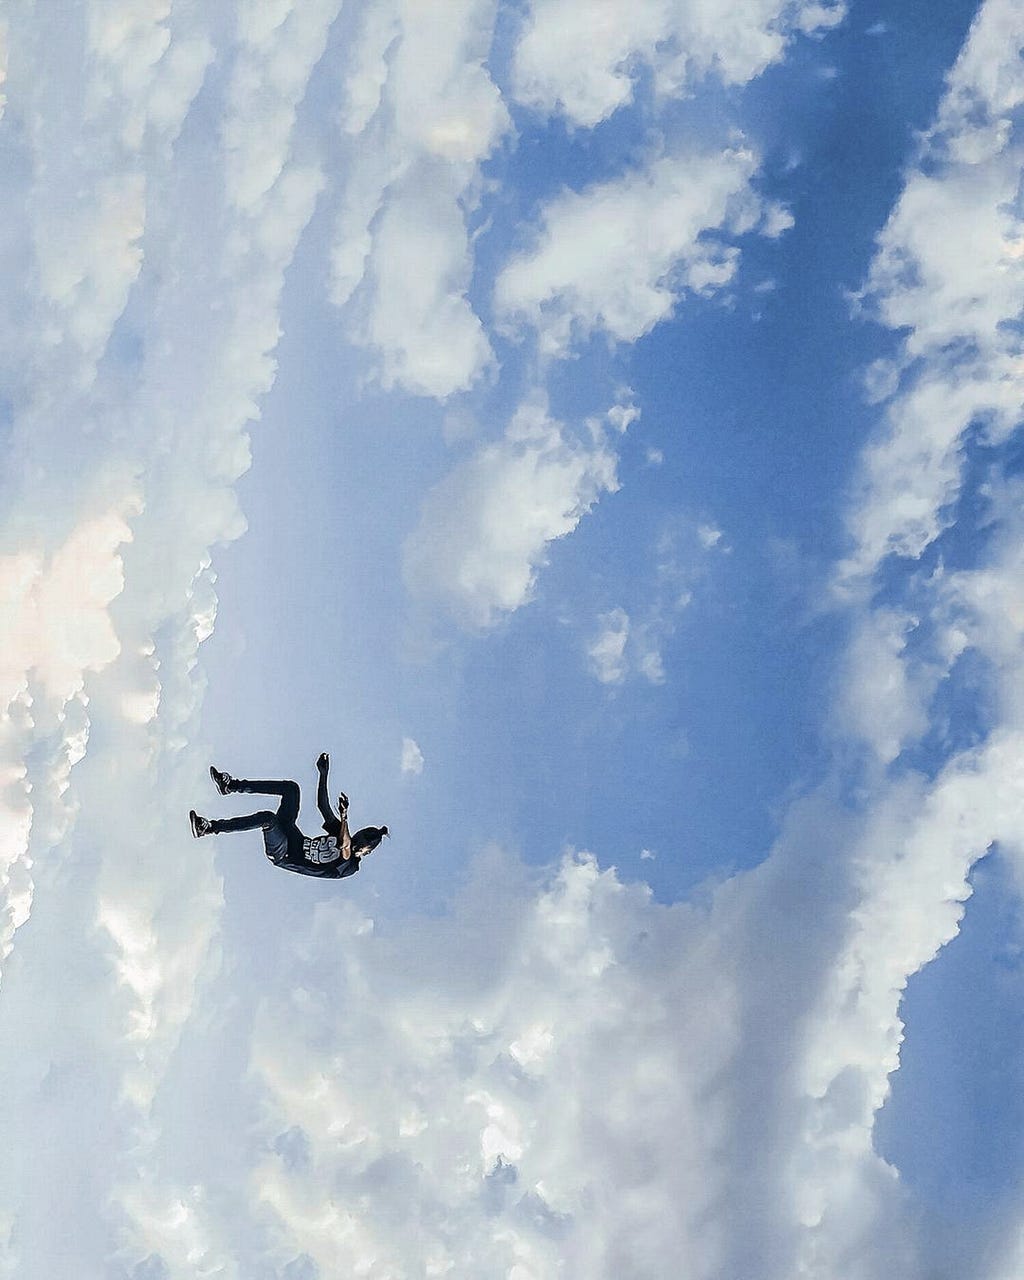 person-performing-sky-jumping